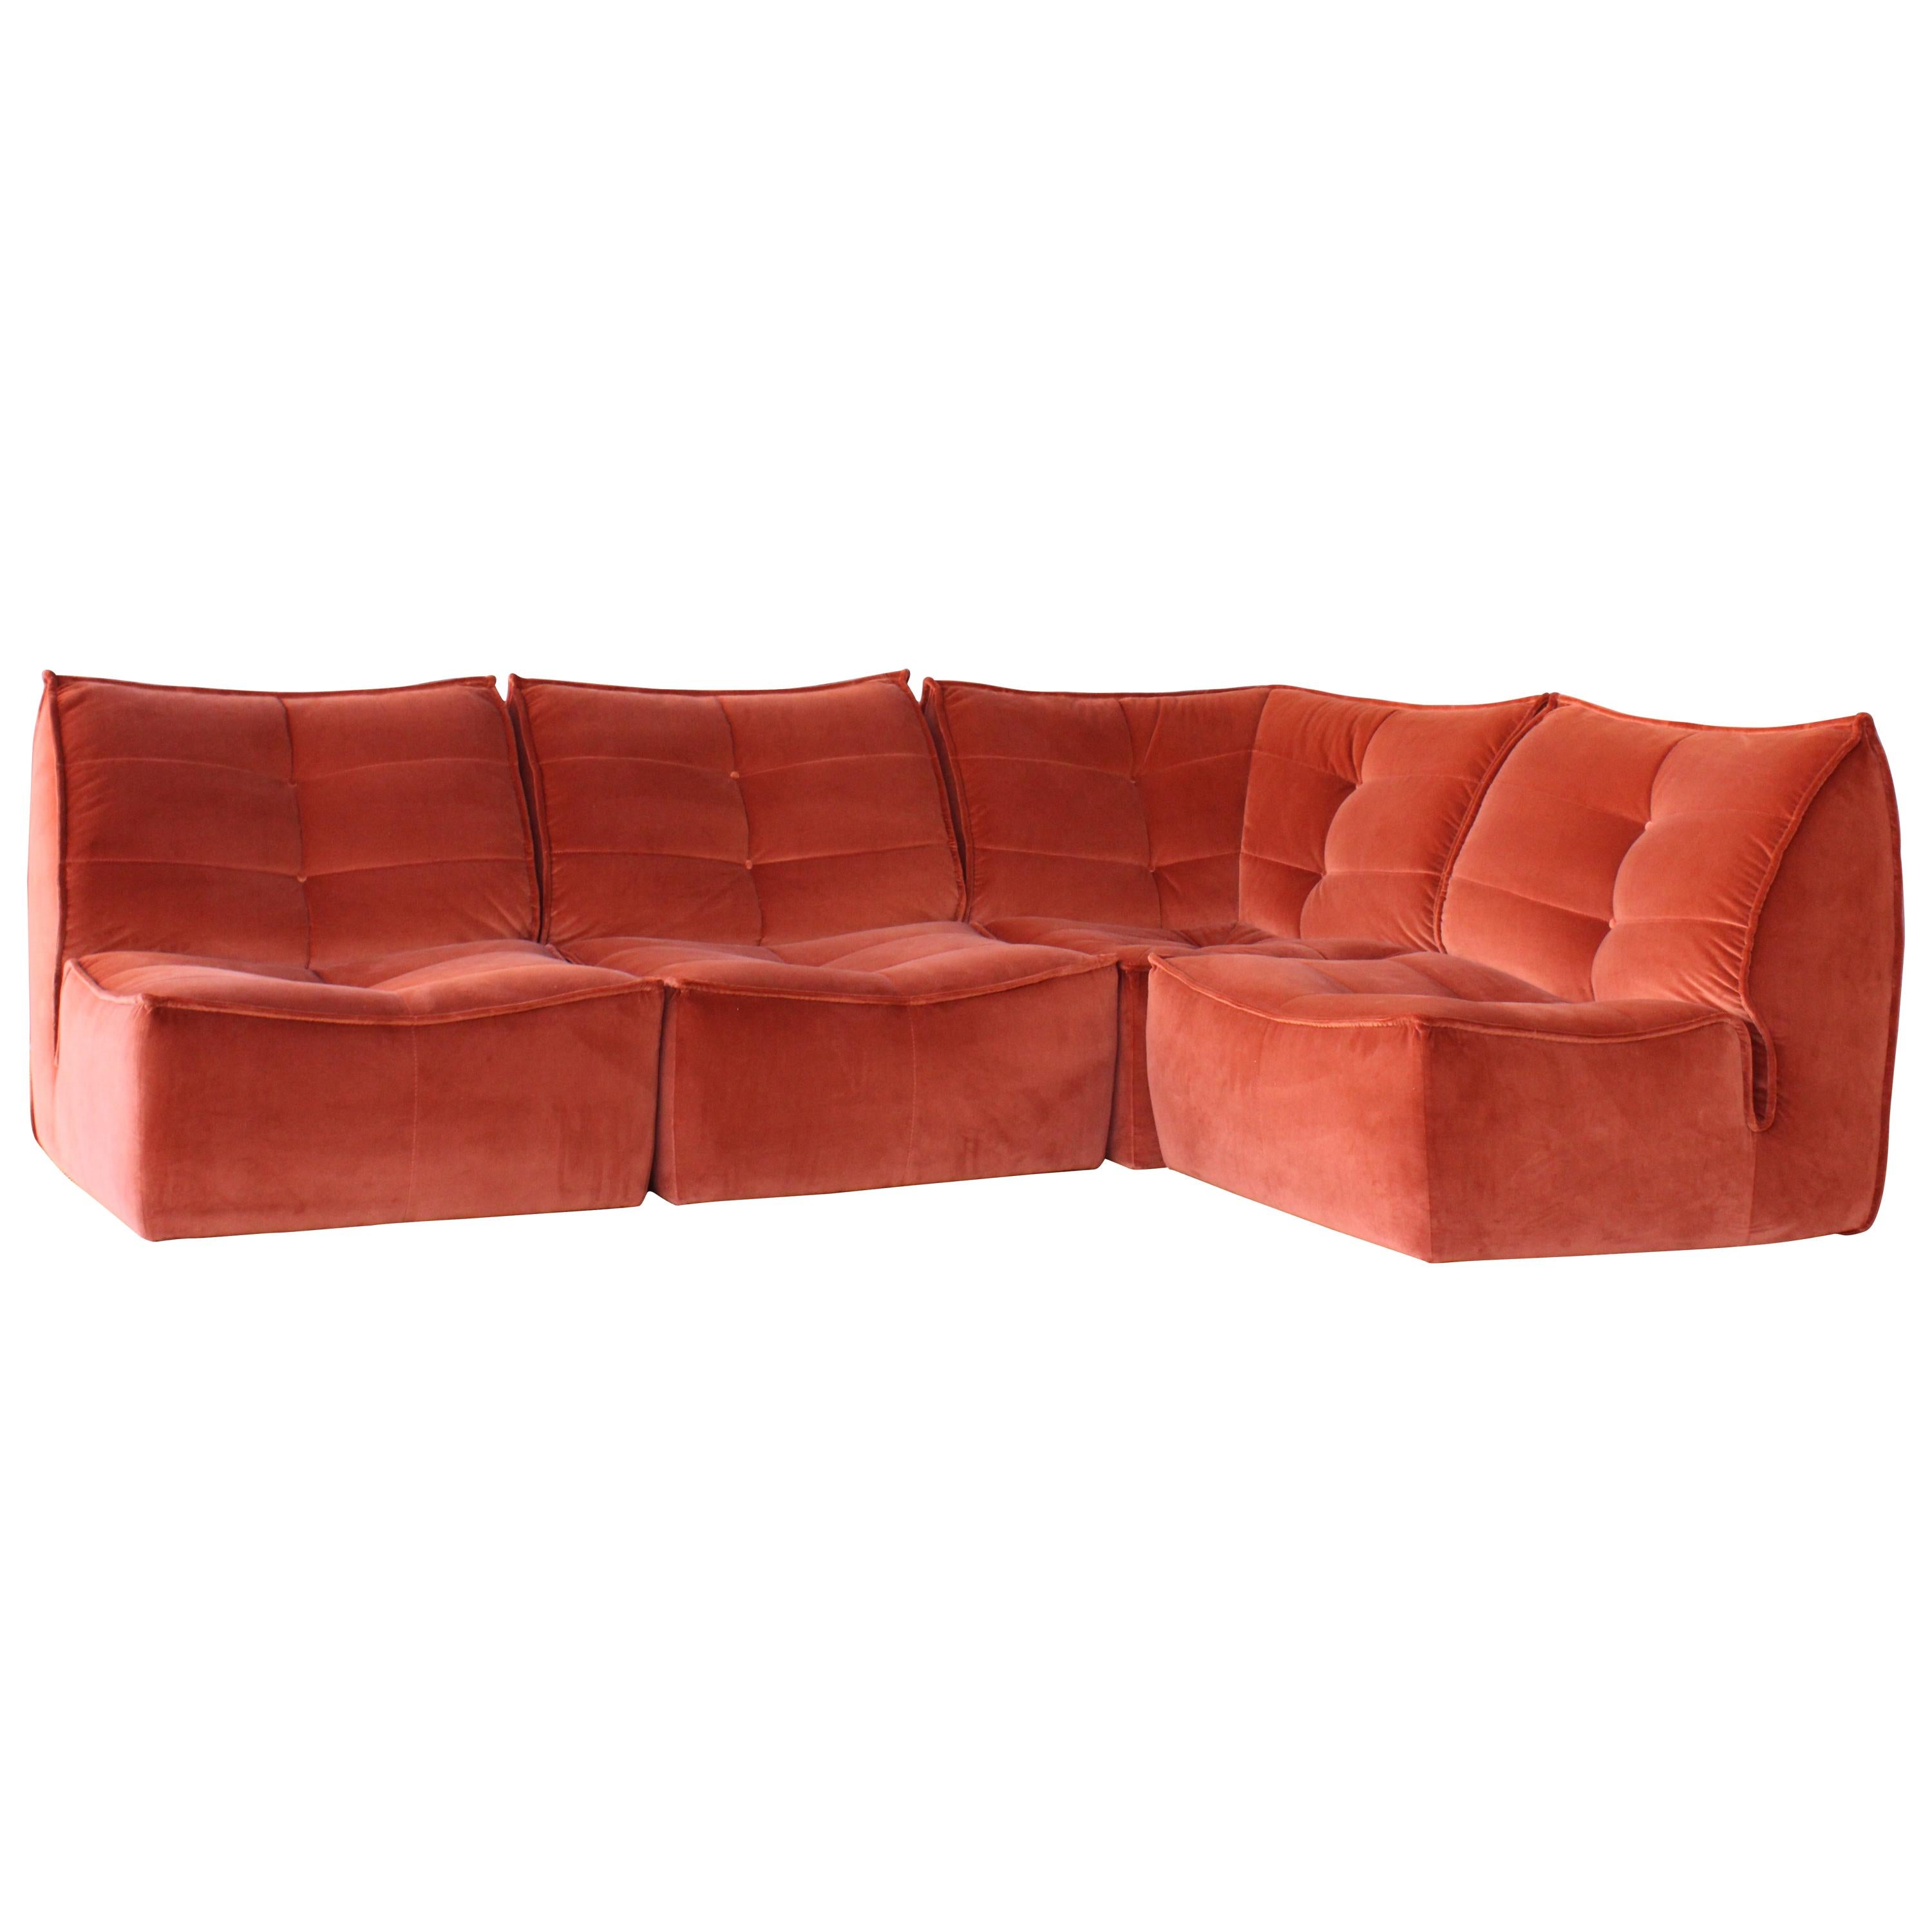 Four-Piece Sectional Sofa, Italy, 1960s